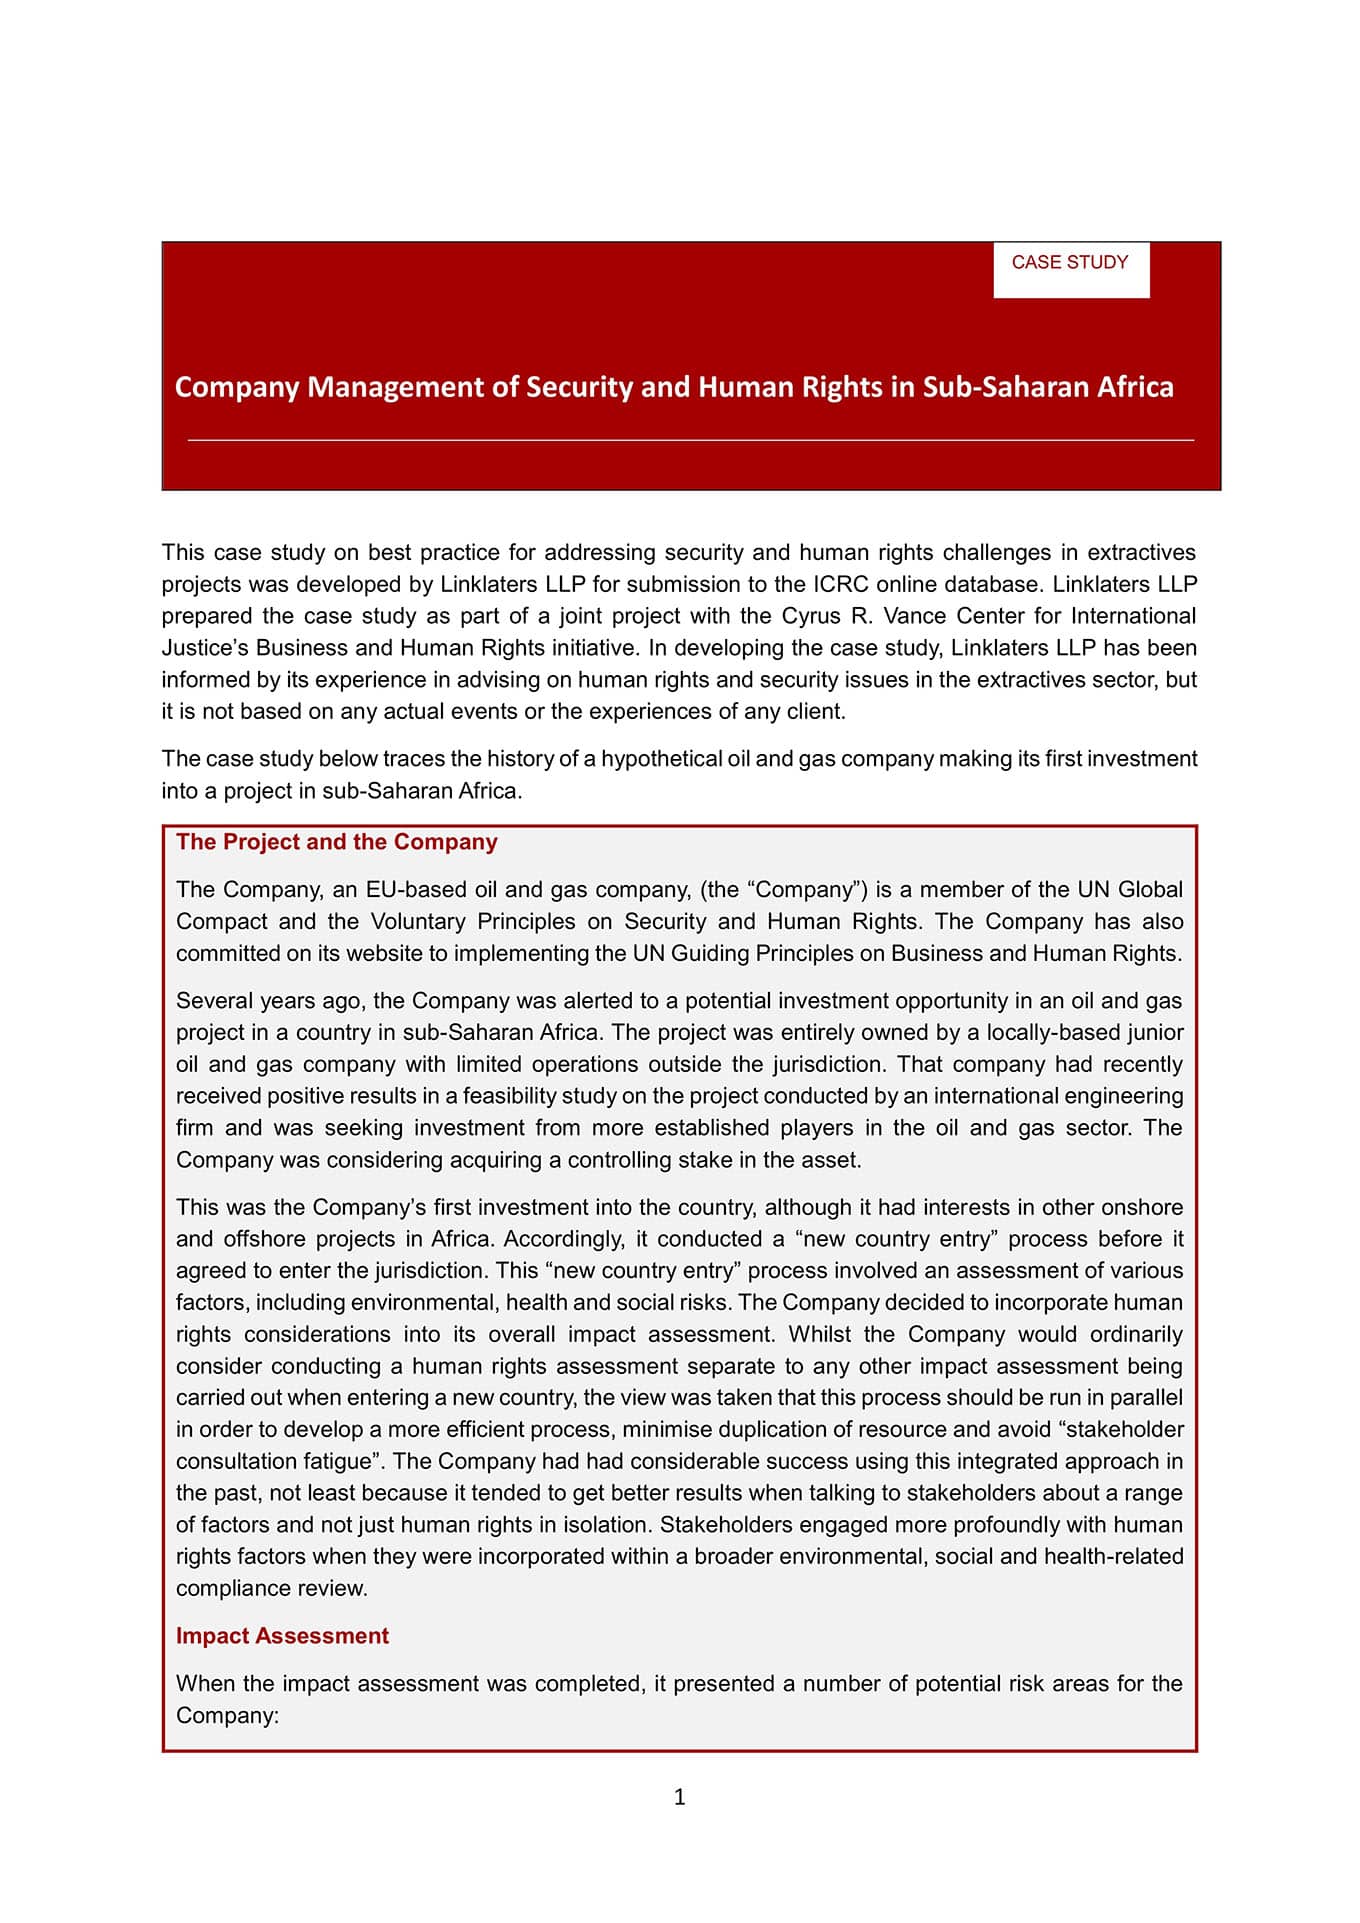 Company Management of Security and Human Rights in Sub-Saharan Africa